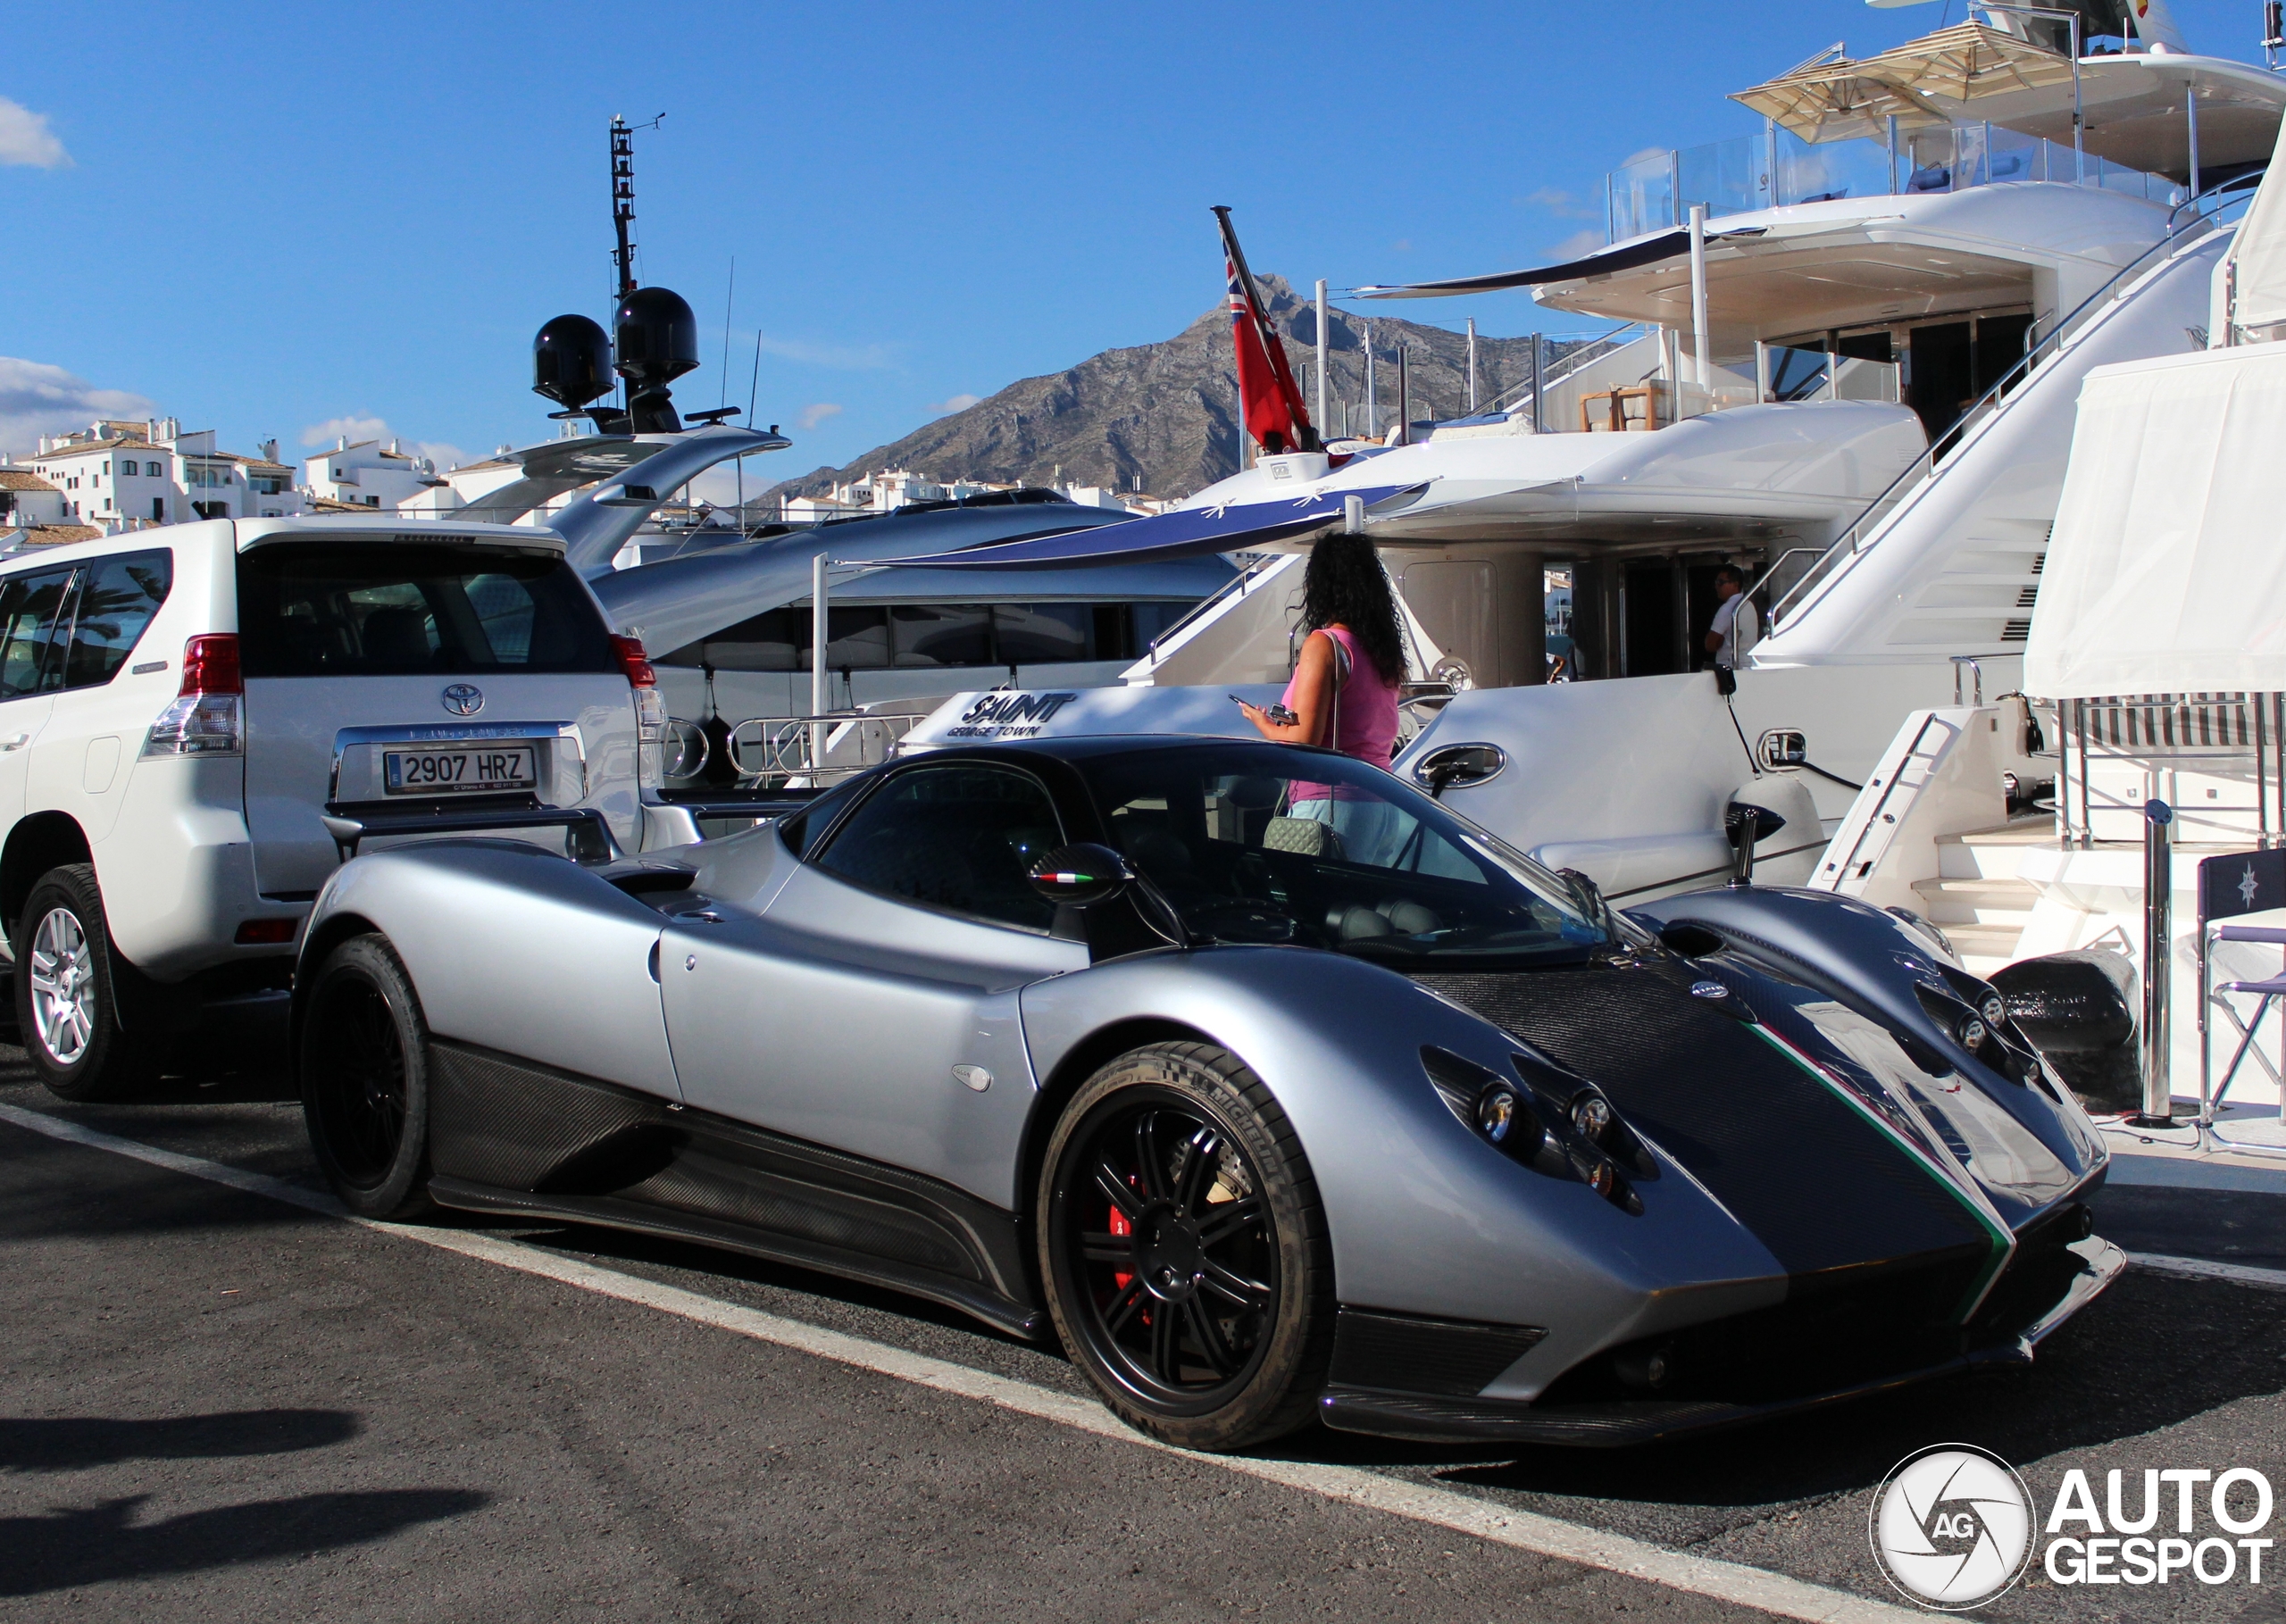 This Zonda appears everywhere